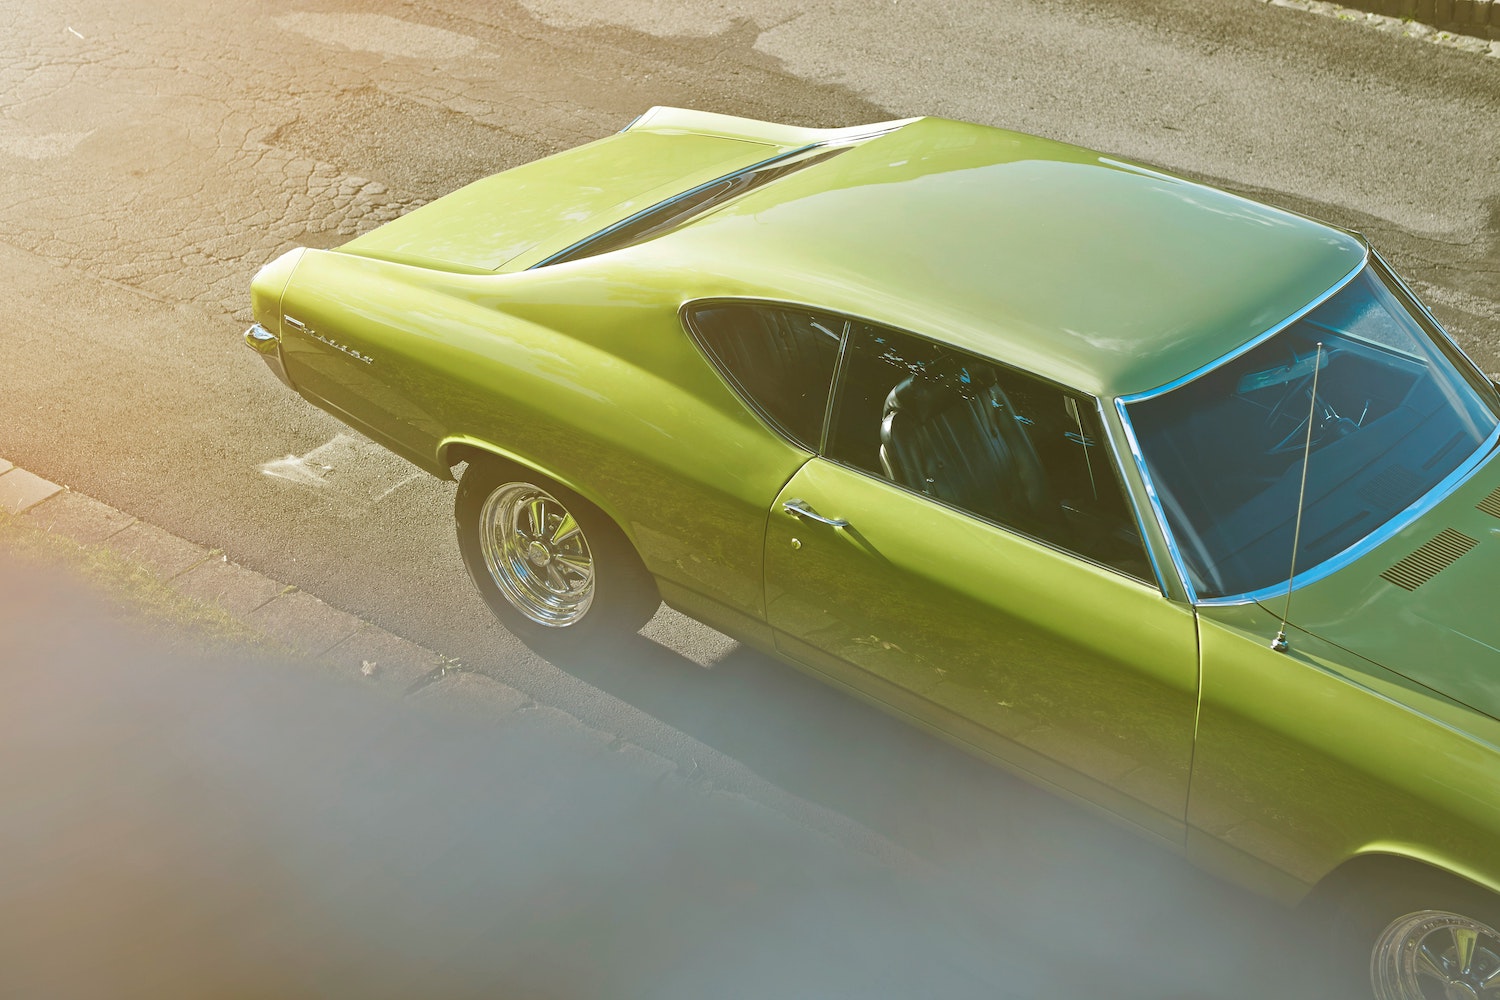 Overhead view of an olive green colored muscle car parked on the street.